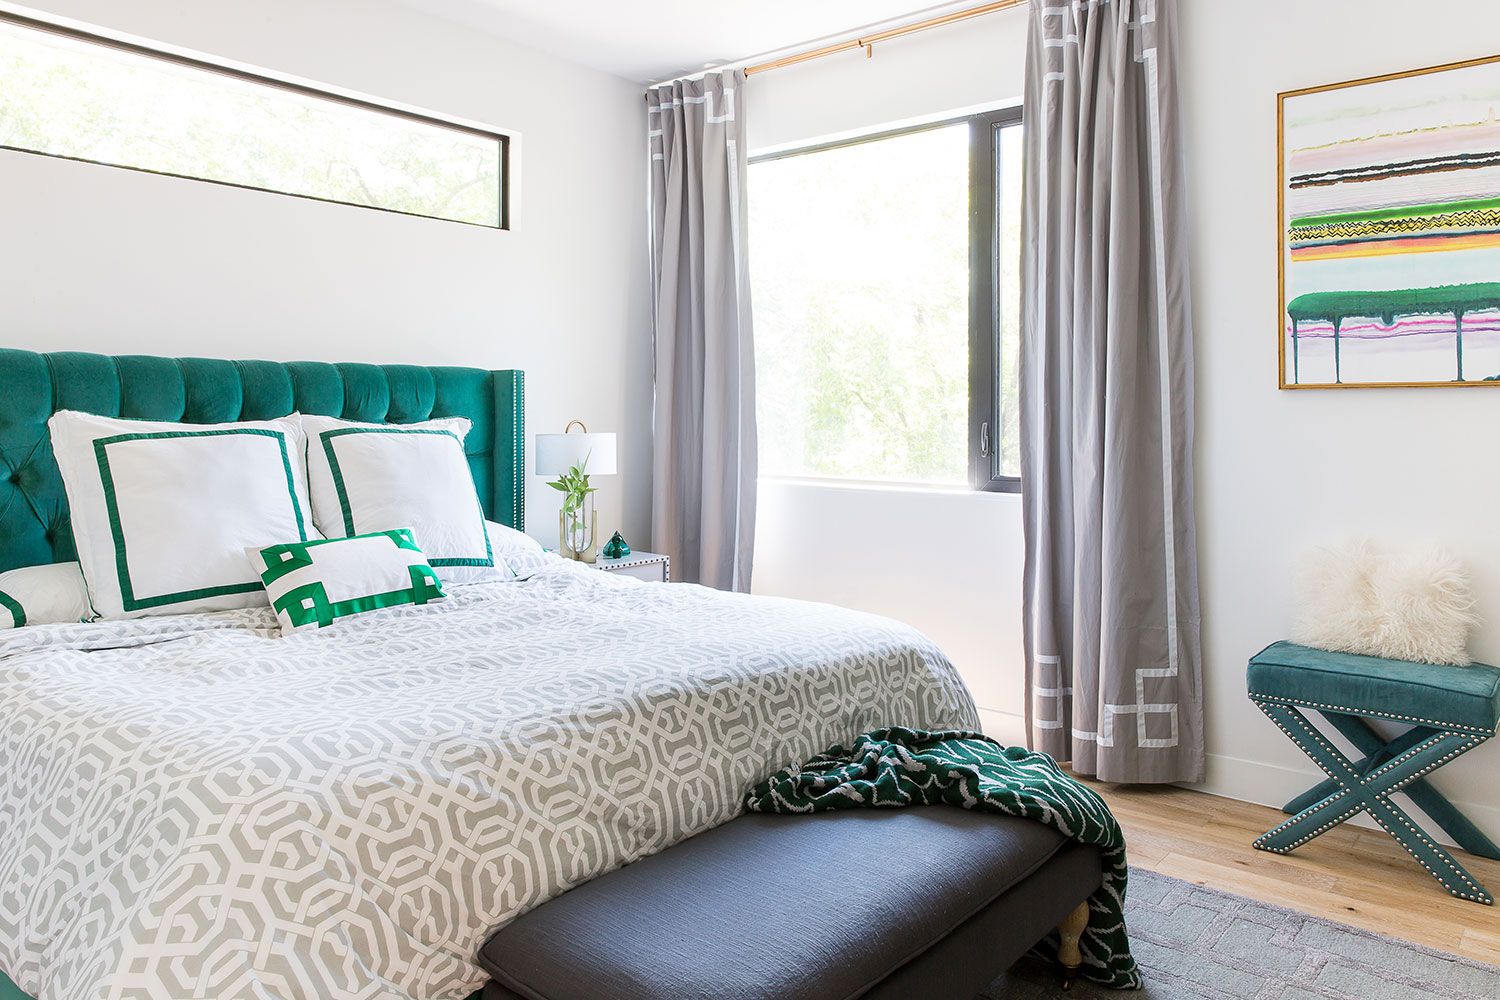 Green and gold bedroom ideas - The Original Bed Co Blog